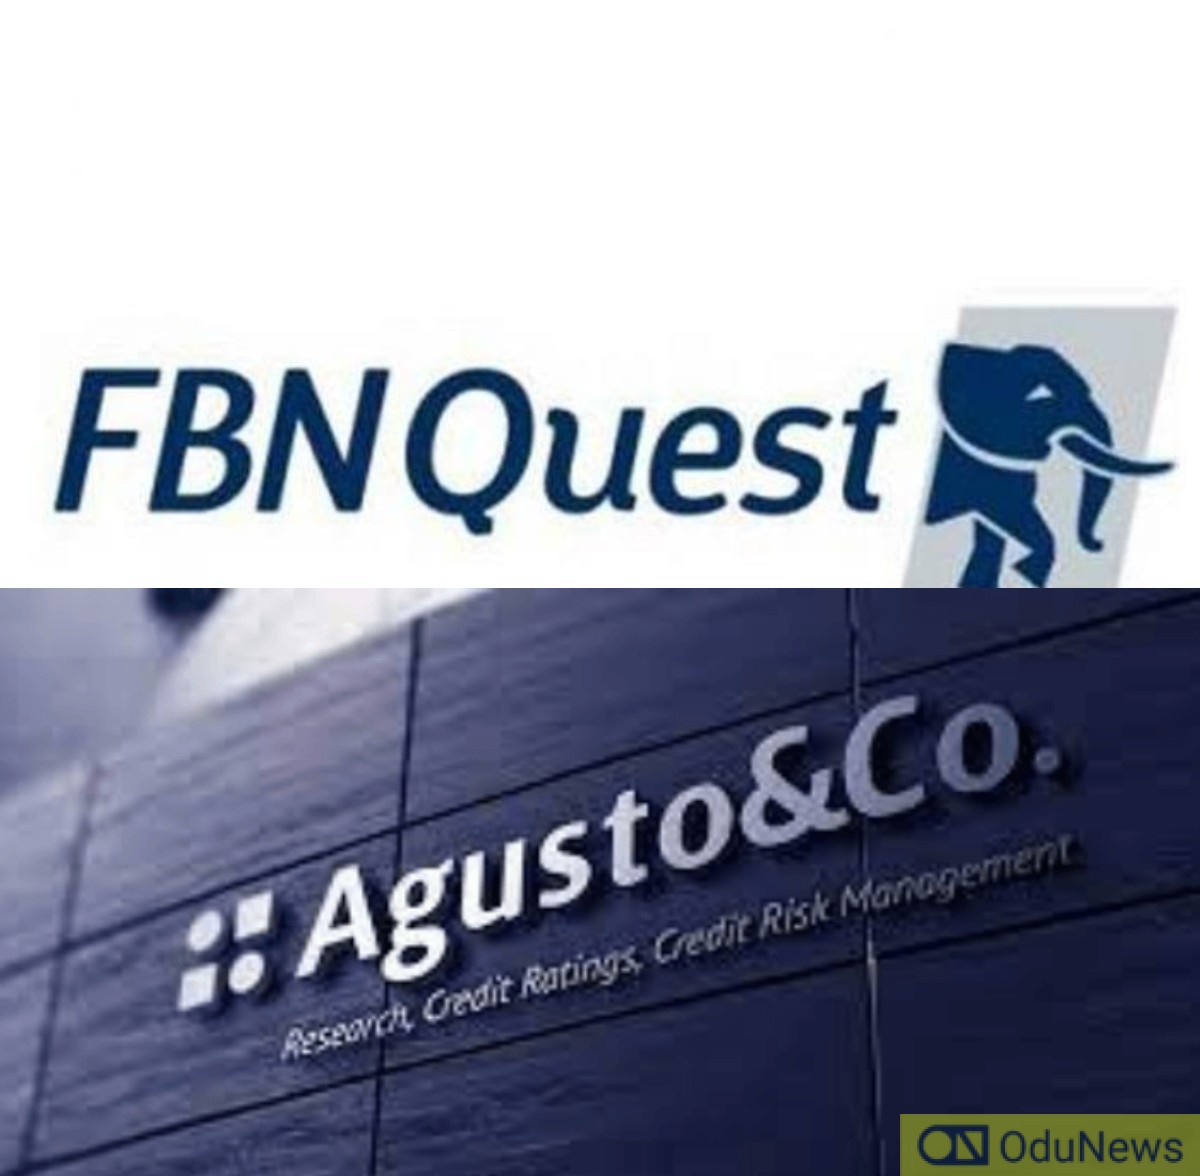 FBNQuest Gets "A" Rating From Augusto & Co.  